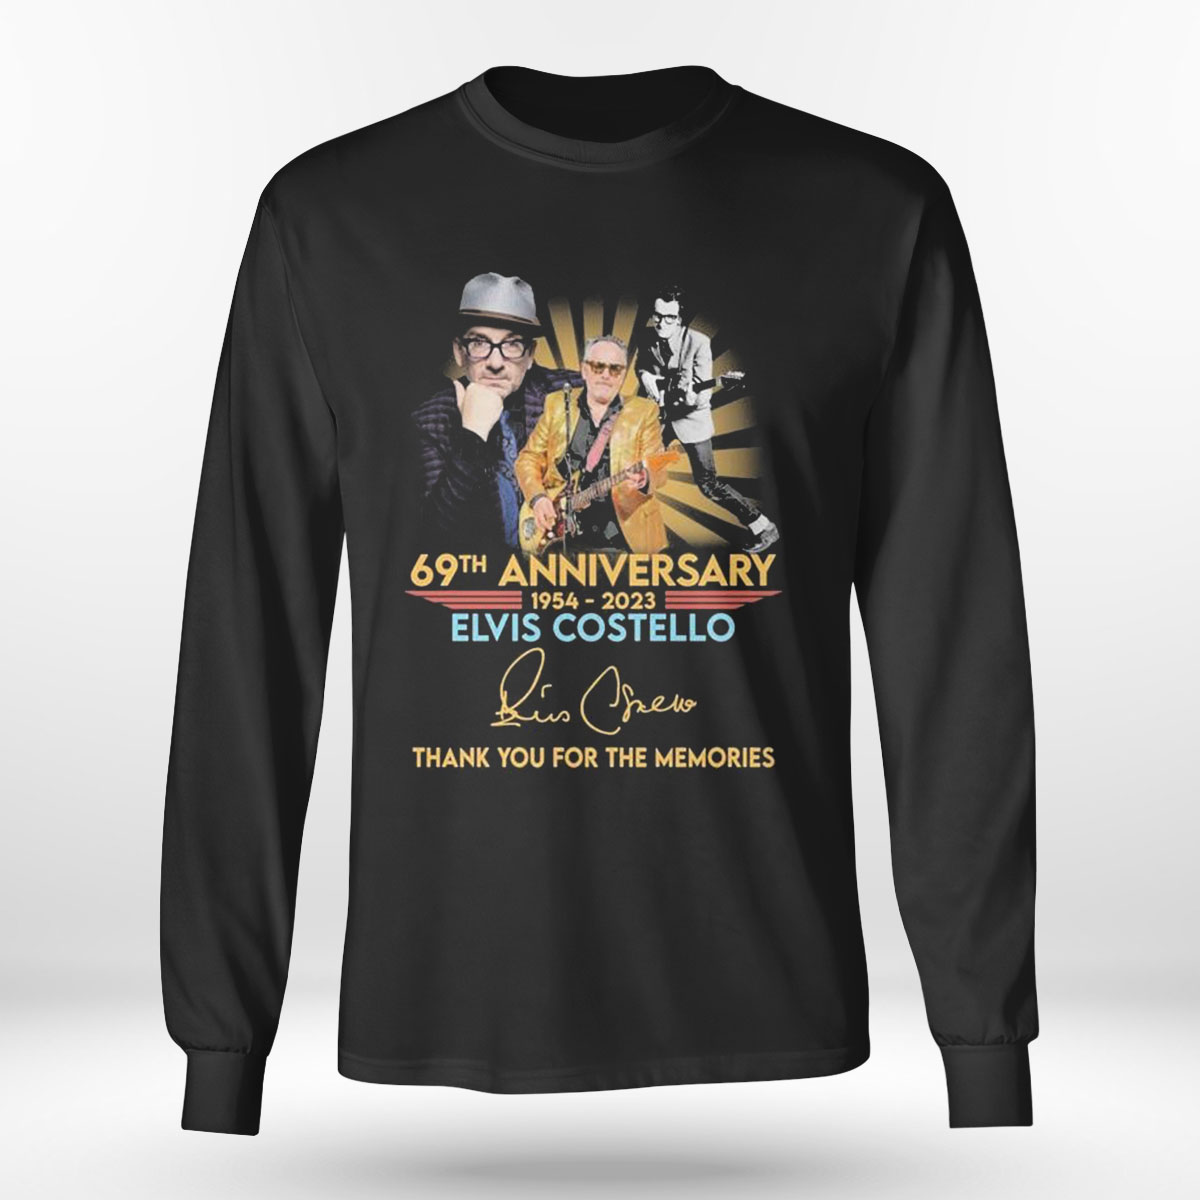 77th Anniversary 1946 2023 Golden State Warriors Team Thank You For The Memories Signatures T-shirt